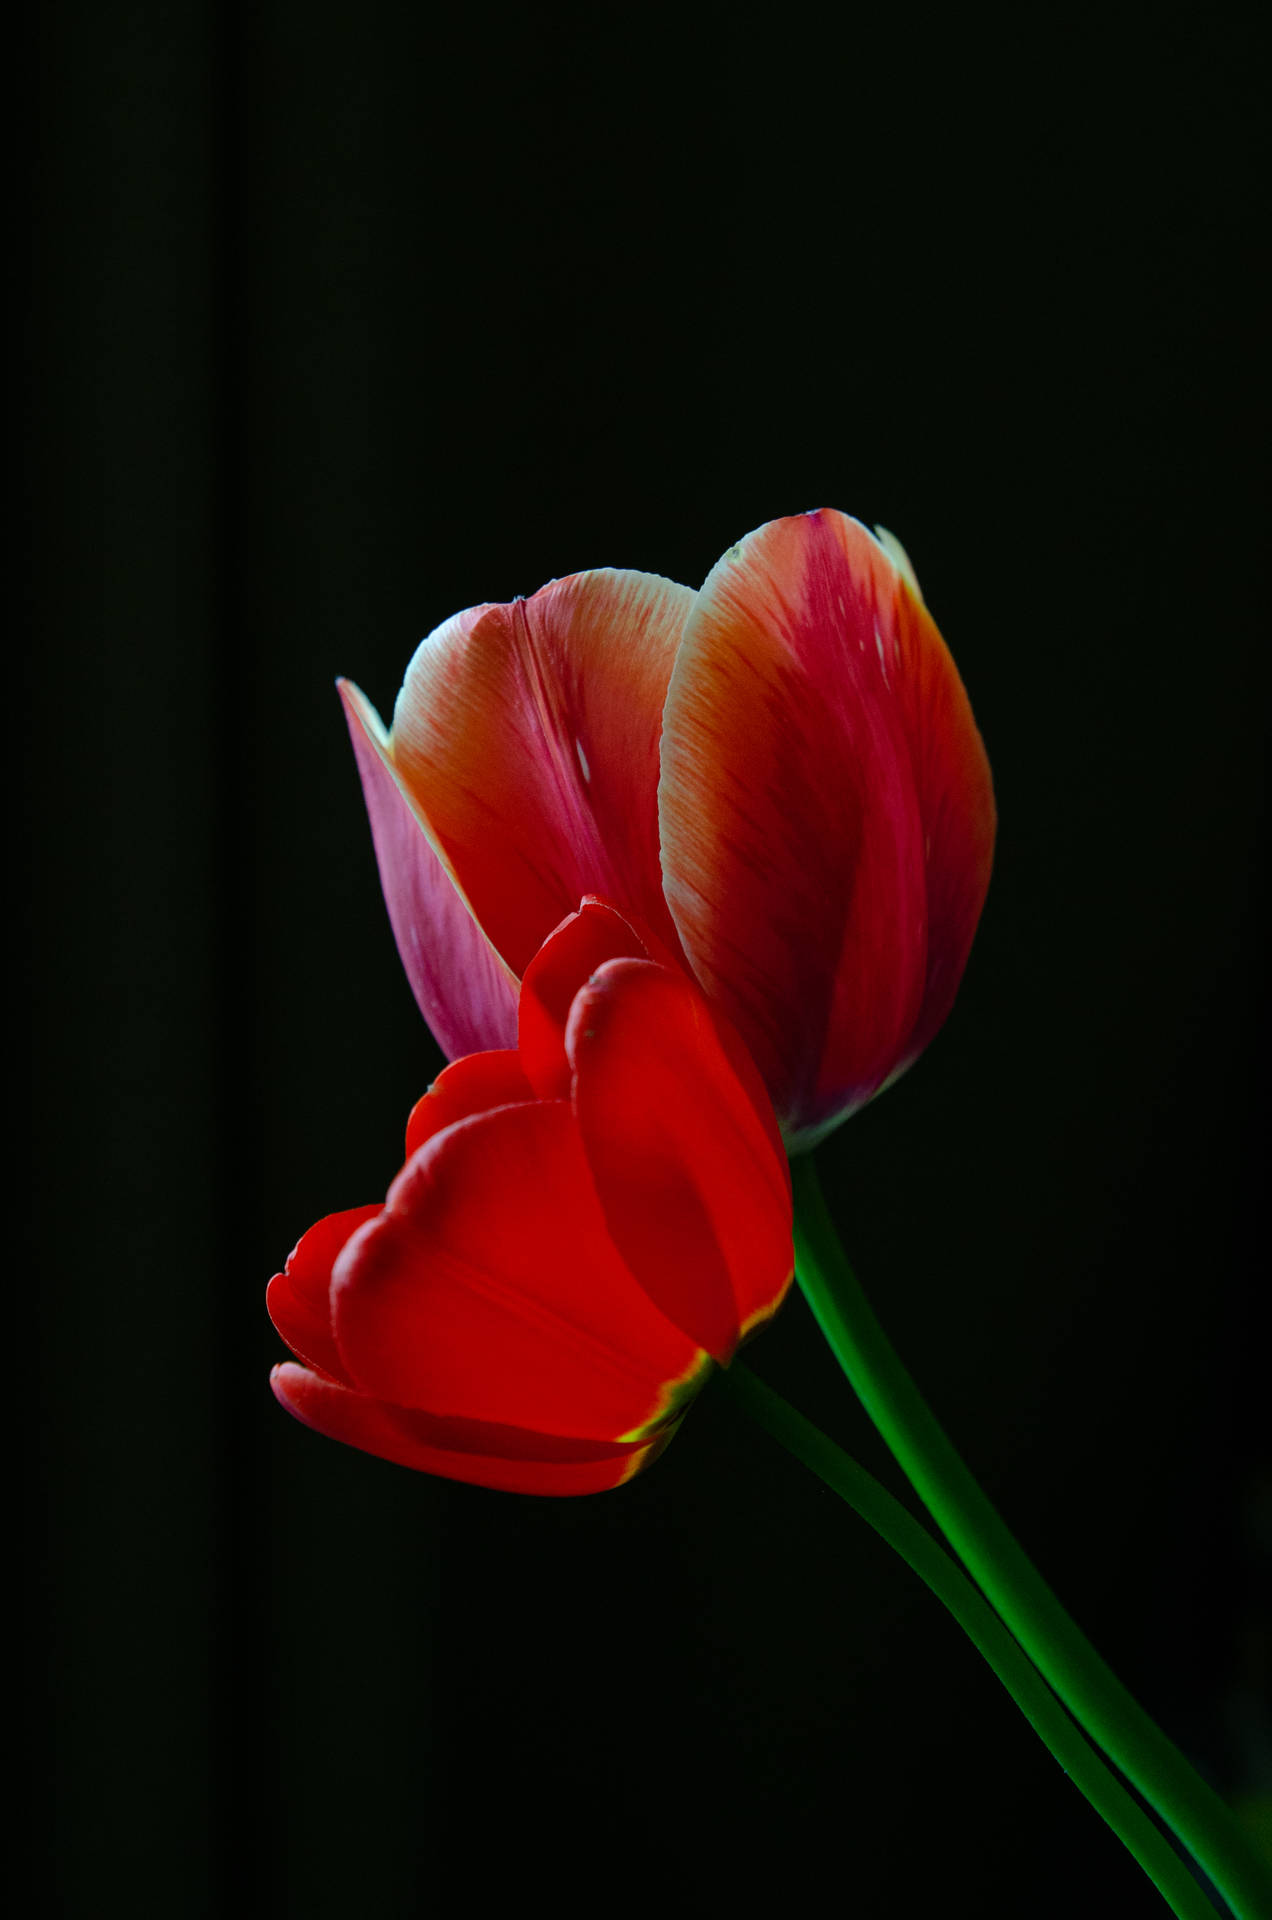 Free Tulip Wallpaper Downloads, [100+] Tulip Wallpapers for FREE |  